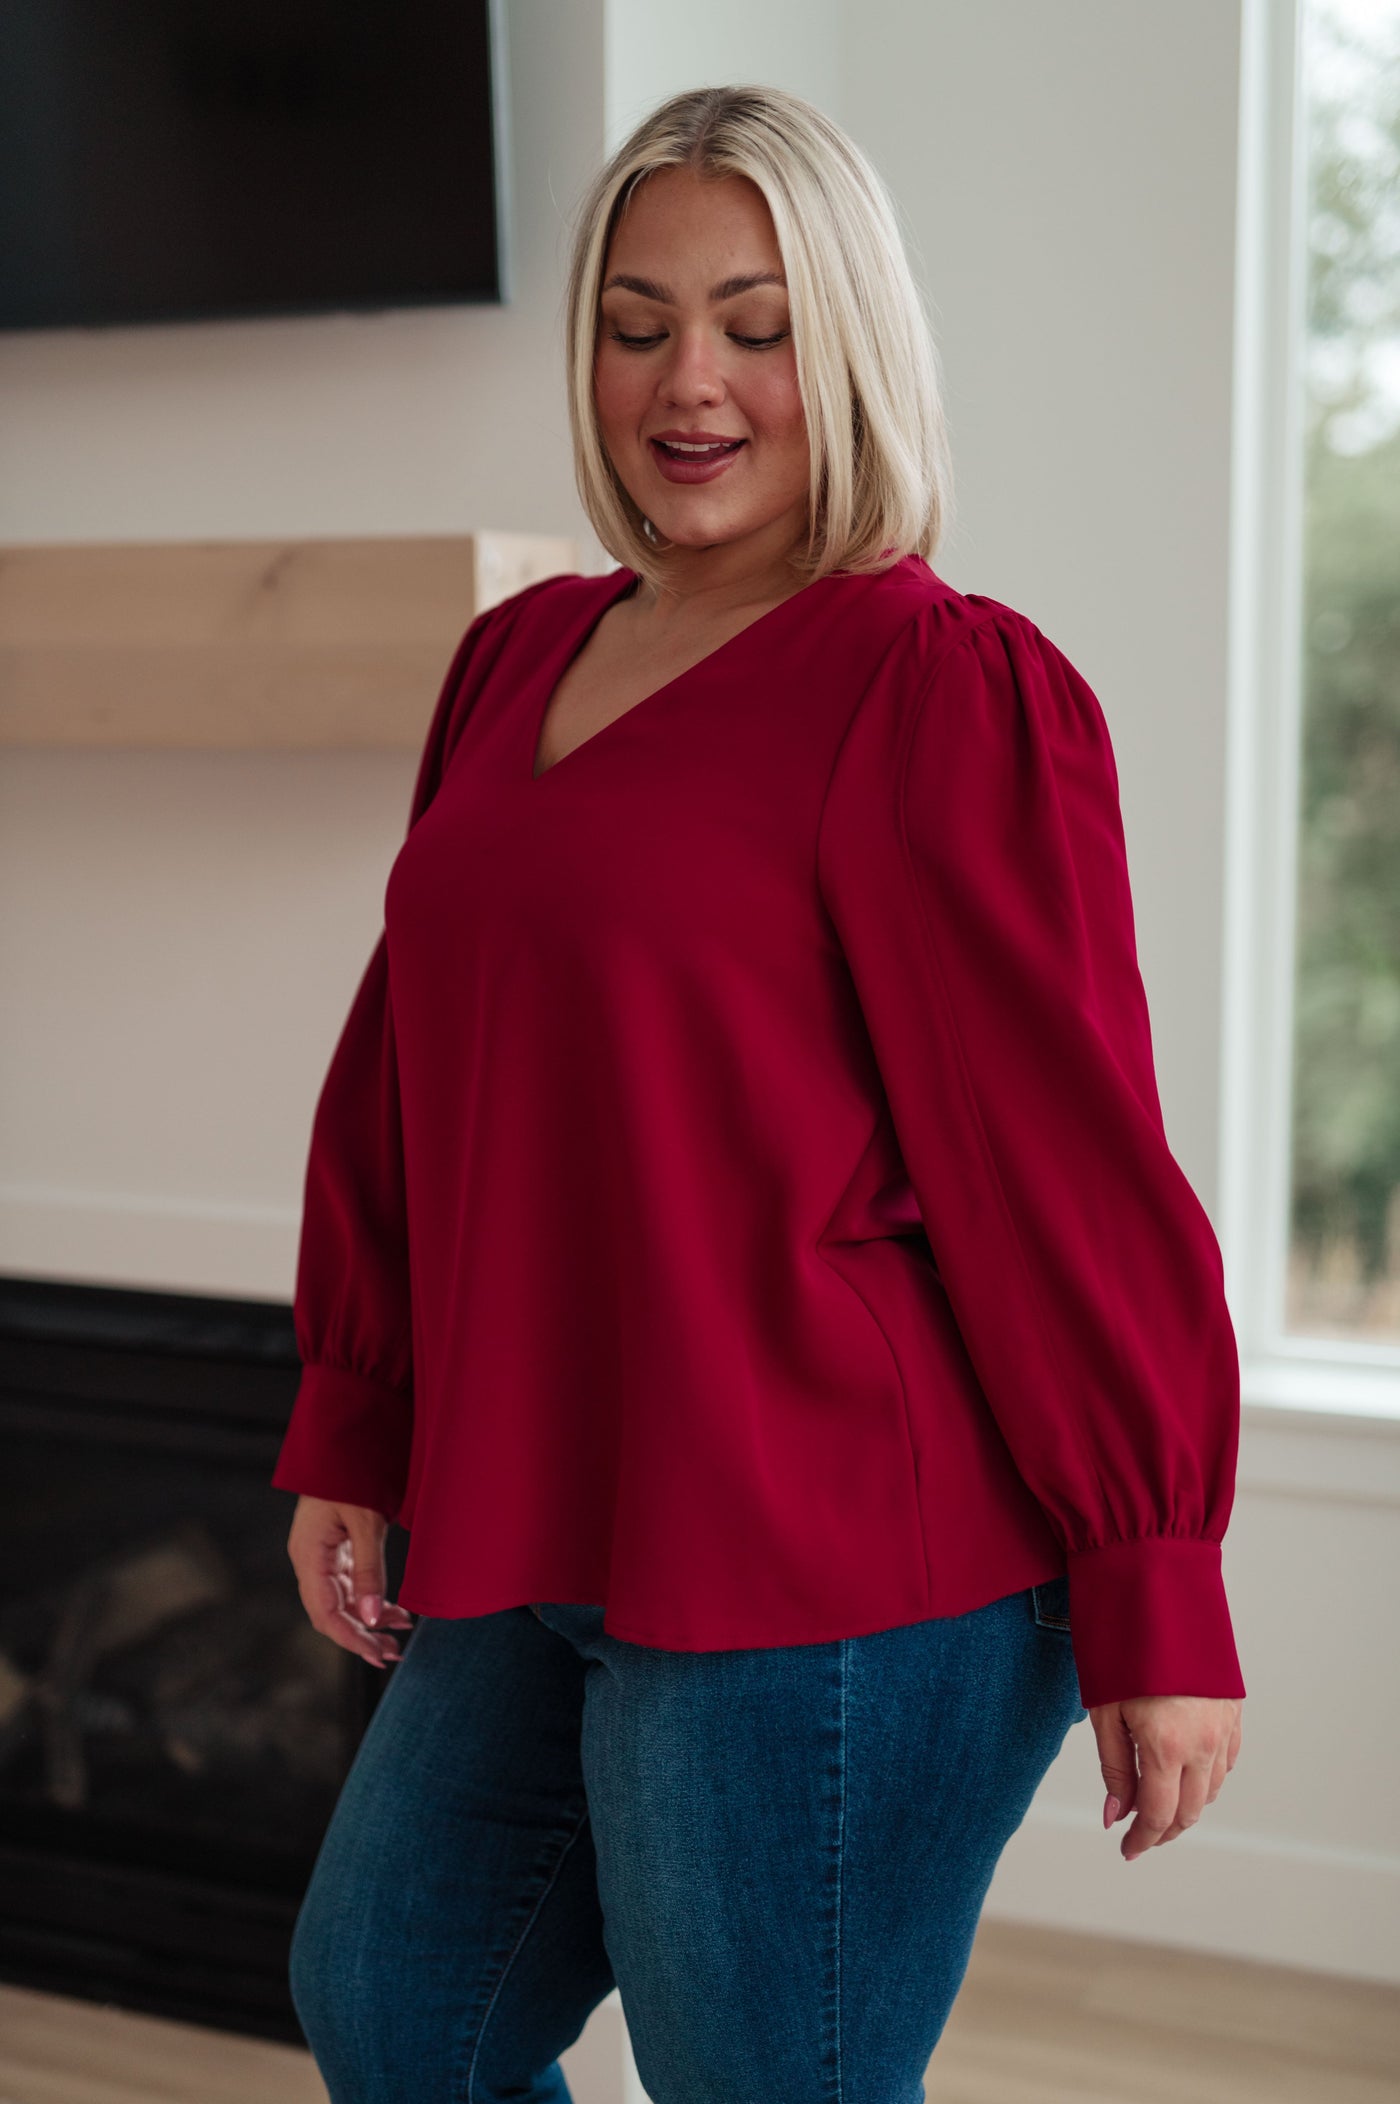 Look stylish and professional this season with our Back in Business V-Neck Blouse. This tailored blouse features a flattering v-neckline, puff sleeves and an easy-to-wear construction